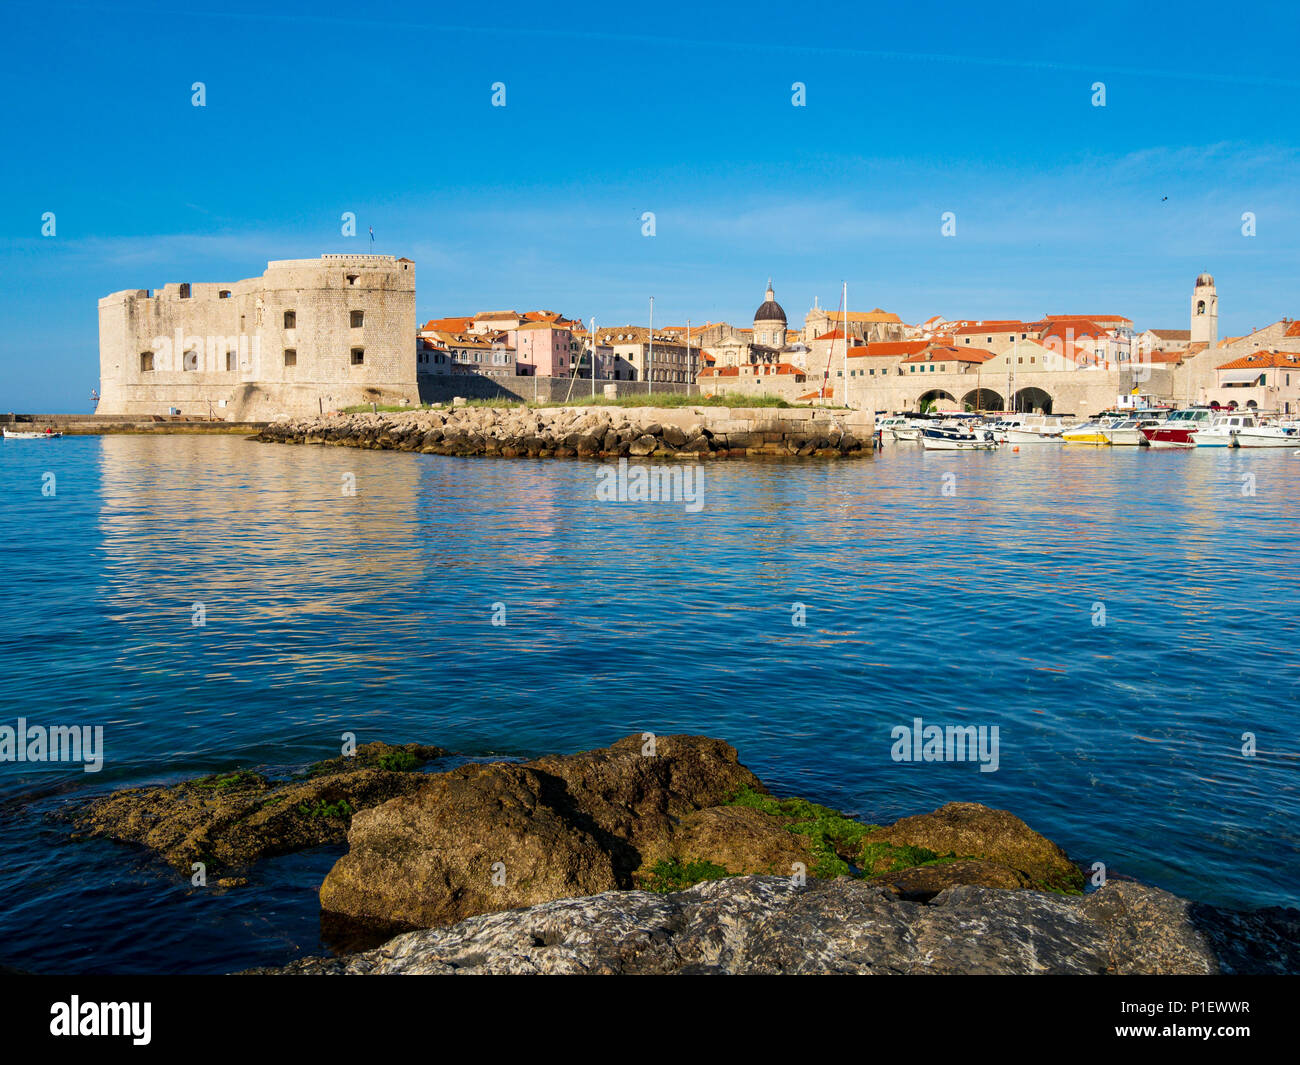 View of Dubrovnik Stock Photo